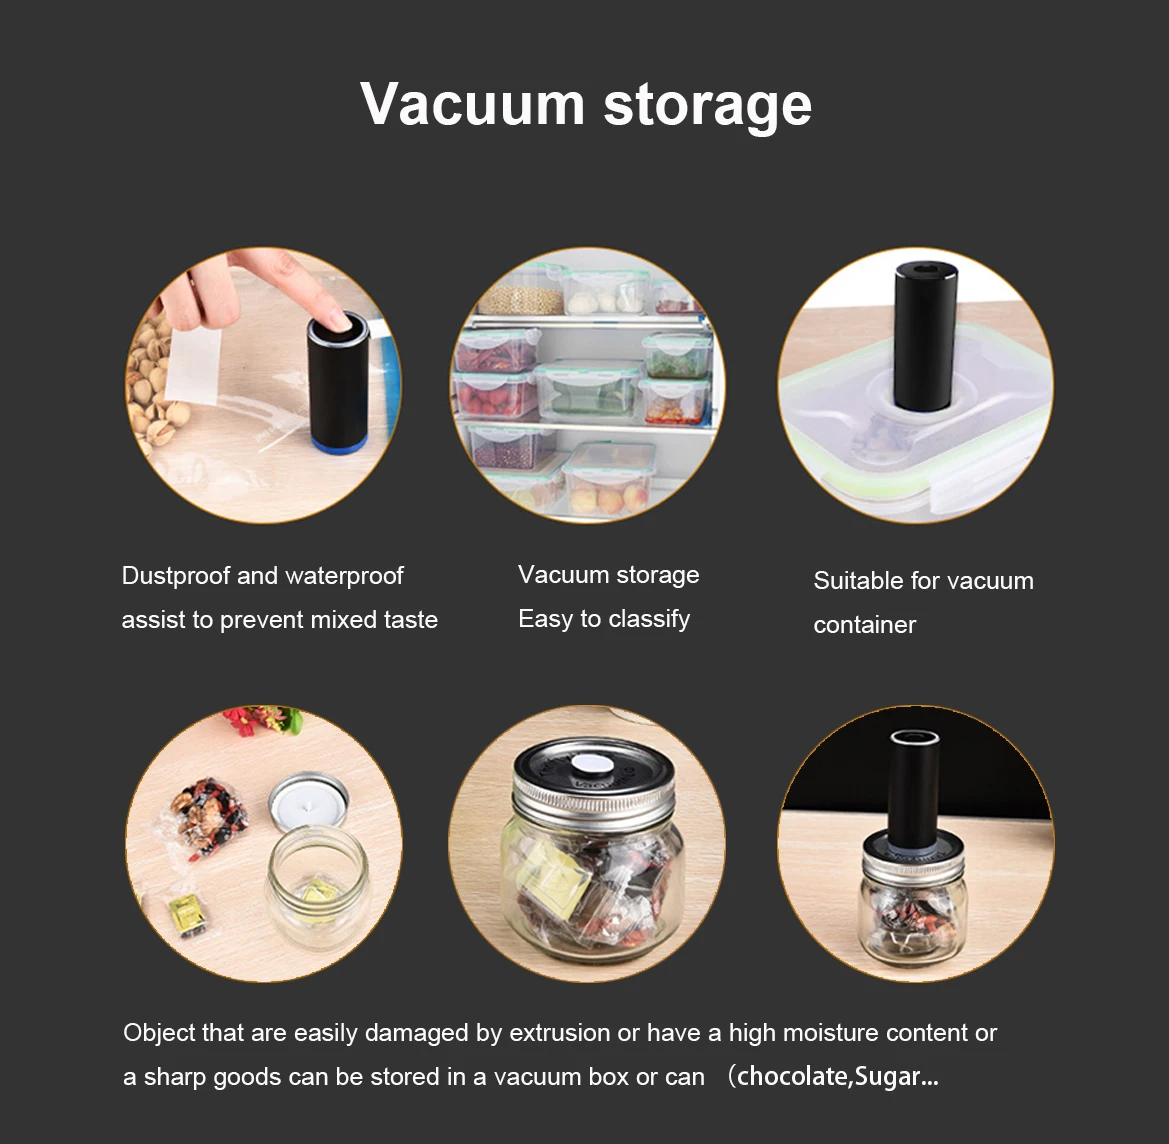  VMSTR Travel Vacuum Storage Bags with Electric Pump, Medium  Small Space Saver Bags for Travel and Home Use : Home & Kitchen